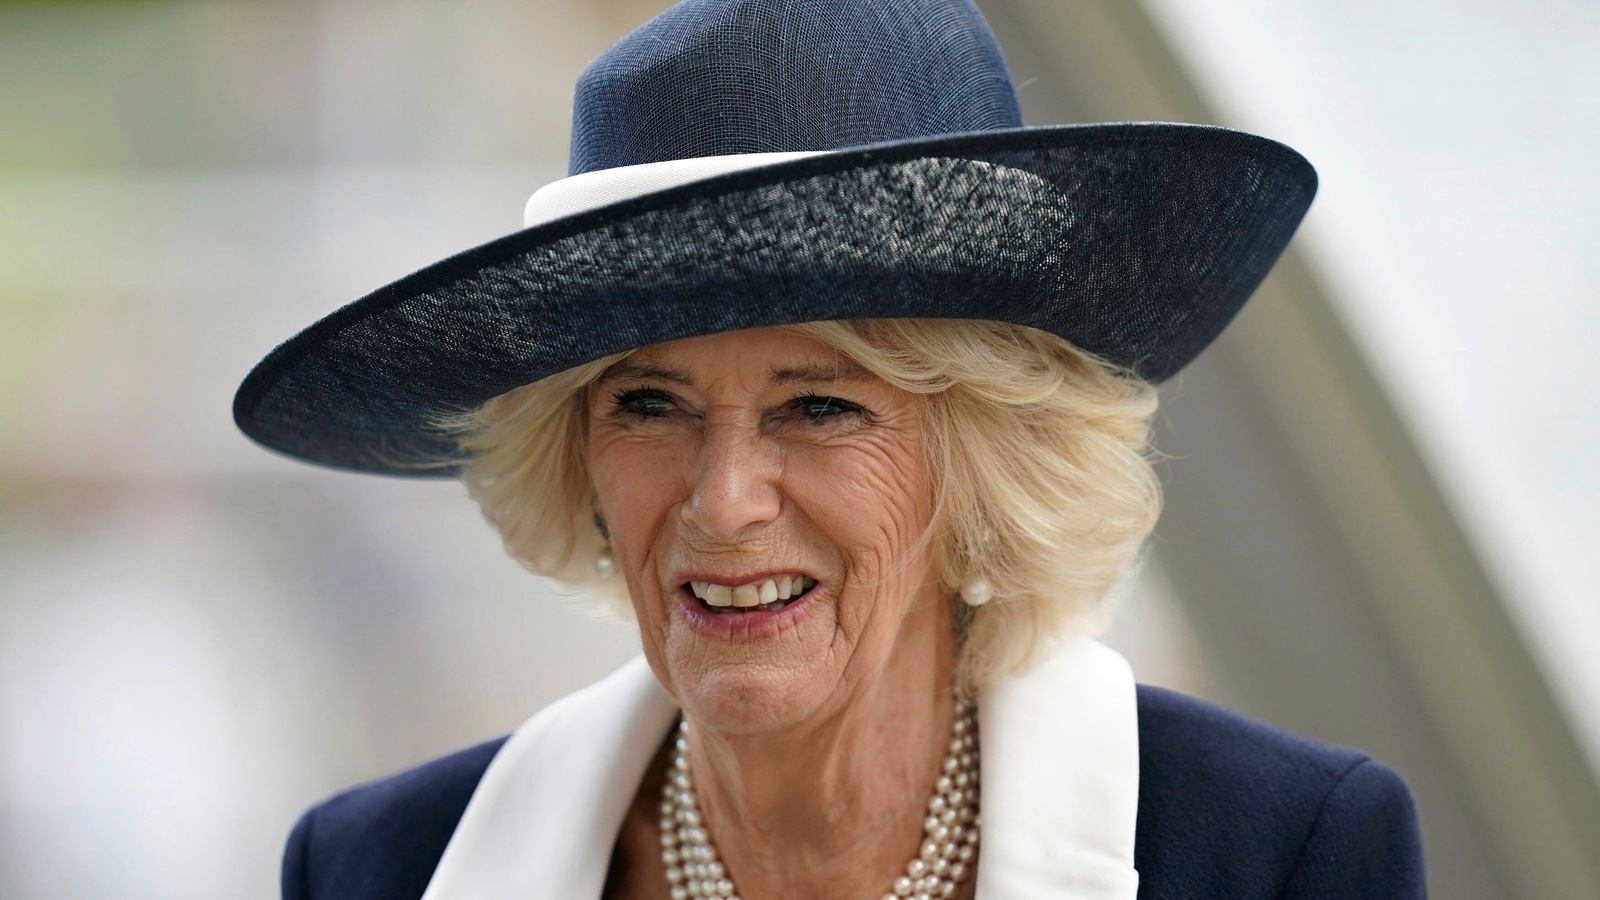 camilla-never-wanted-to-be-a-surrogate-mother-to-prince-william-and-harry-as